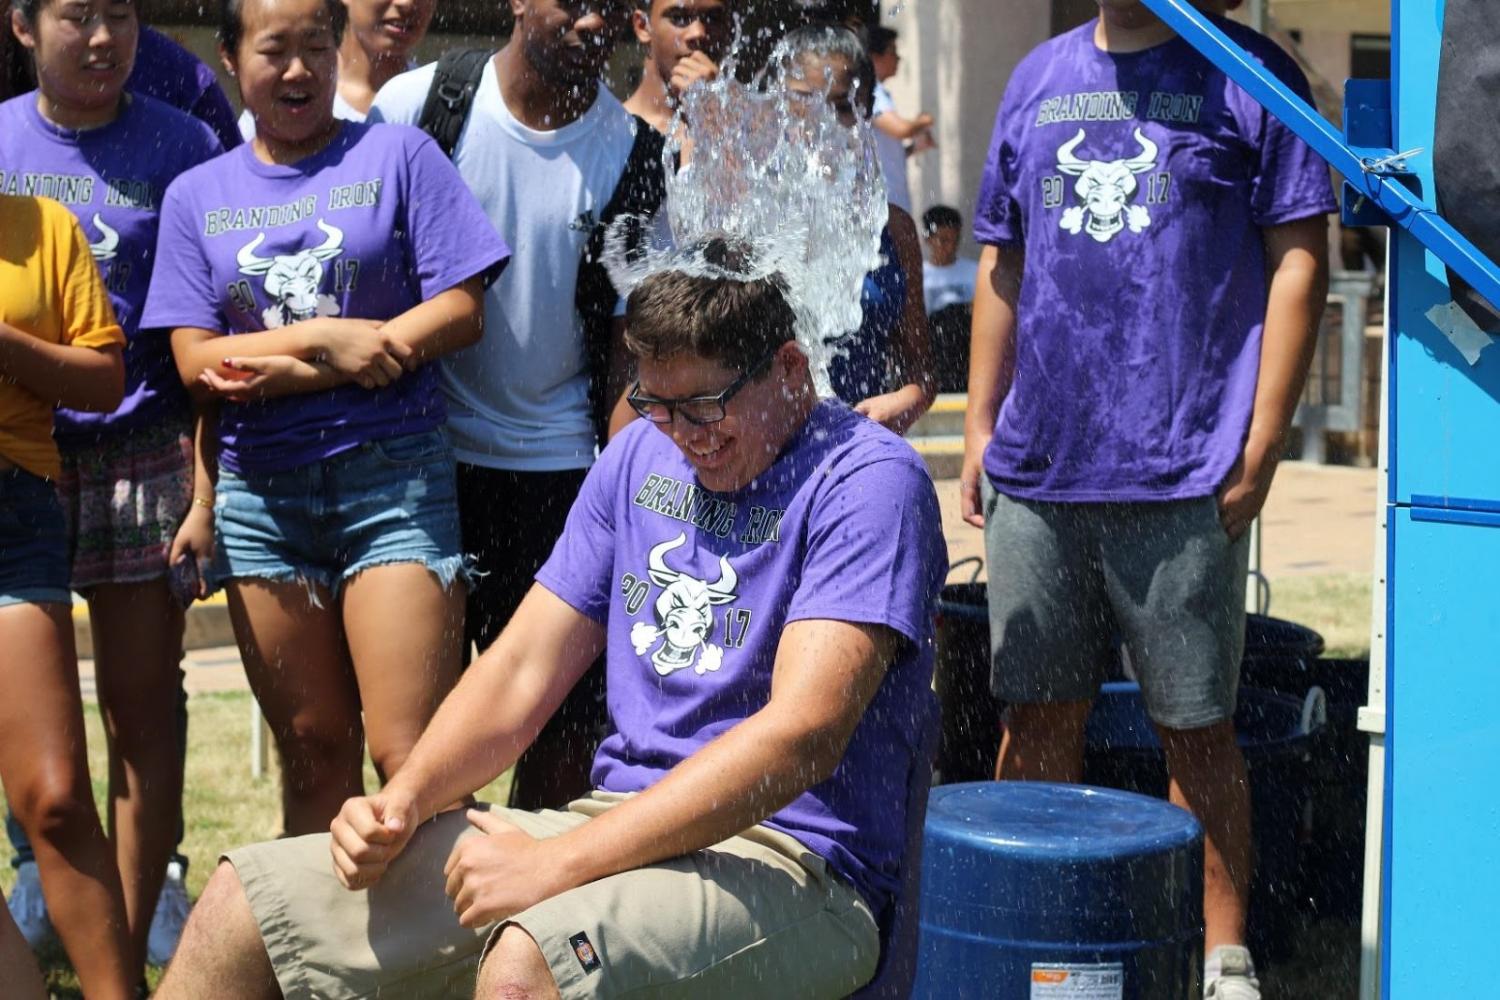 Senior+Matthew+Rodriguez+is+dunked+with+water+while+participating+in+Branding+Iron+activities+at+lunch+in+the+upper+quad.